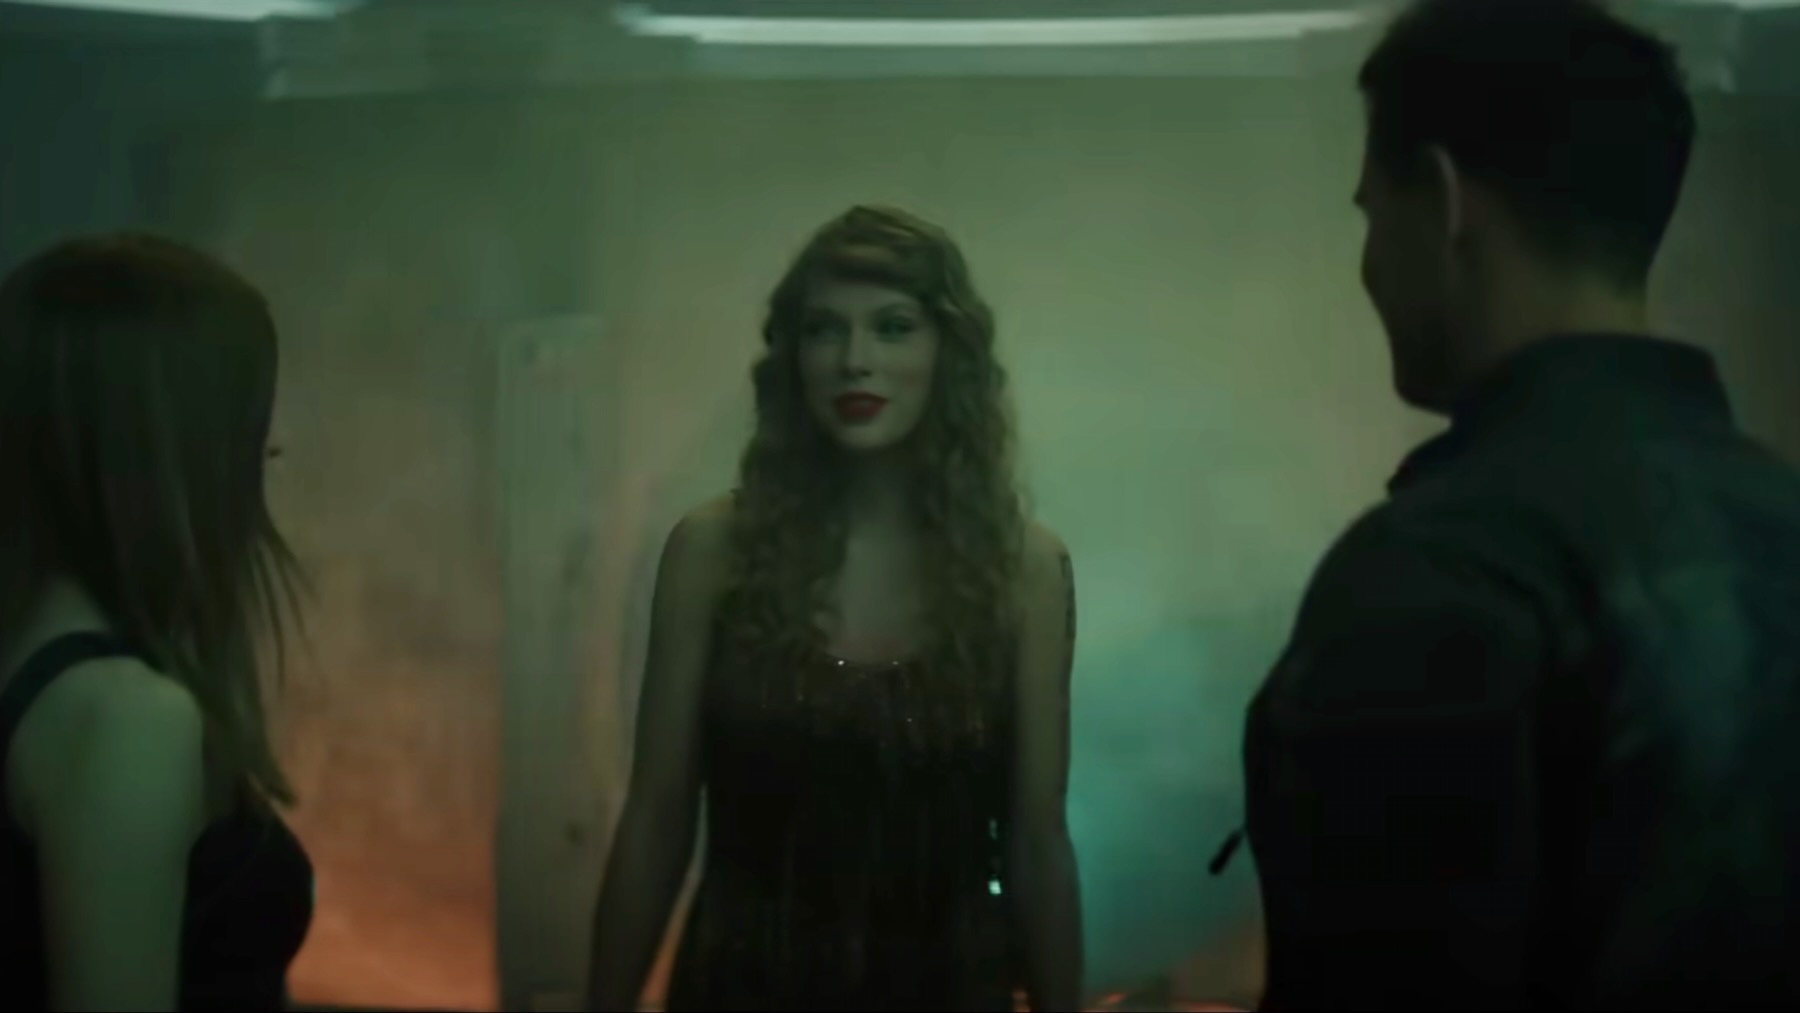 i-can-see-you-taylors-version-video-2743149-2690442-jpeg